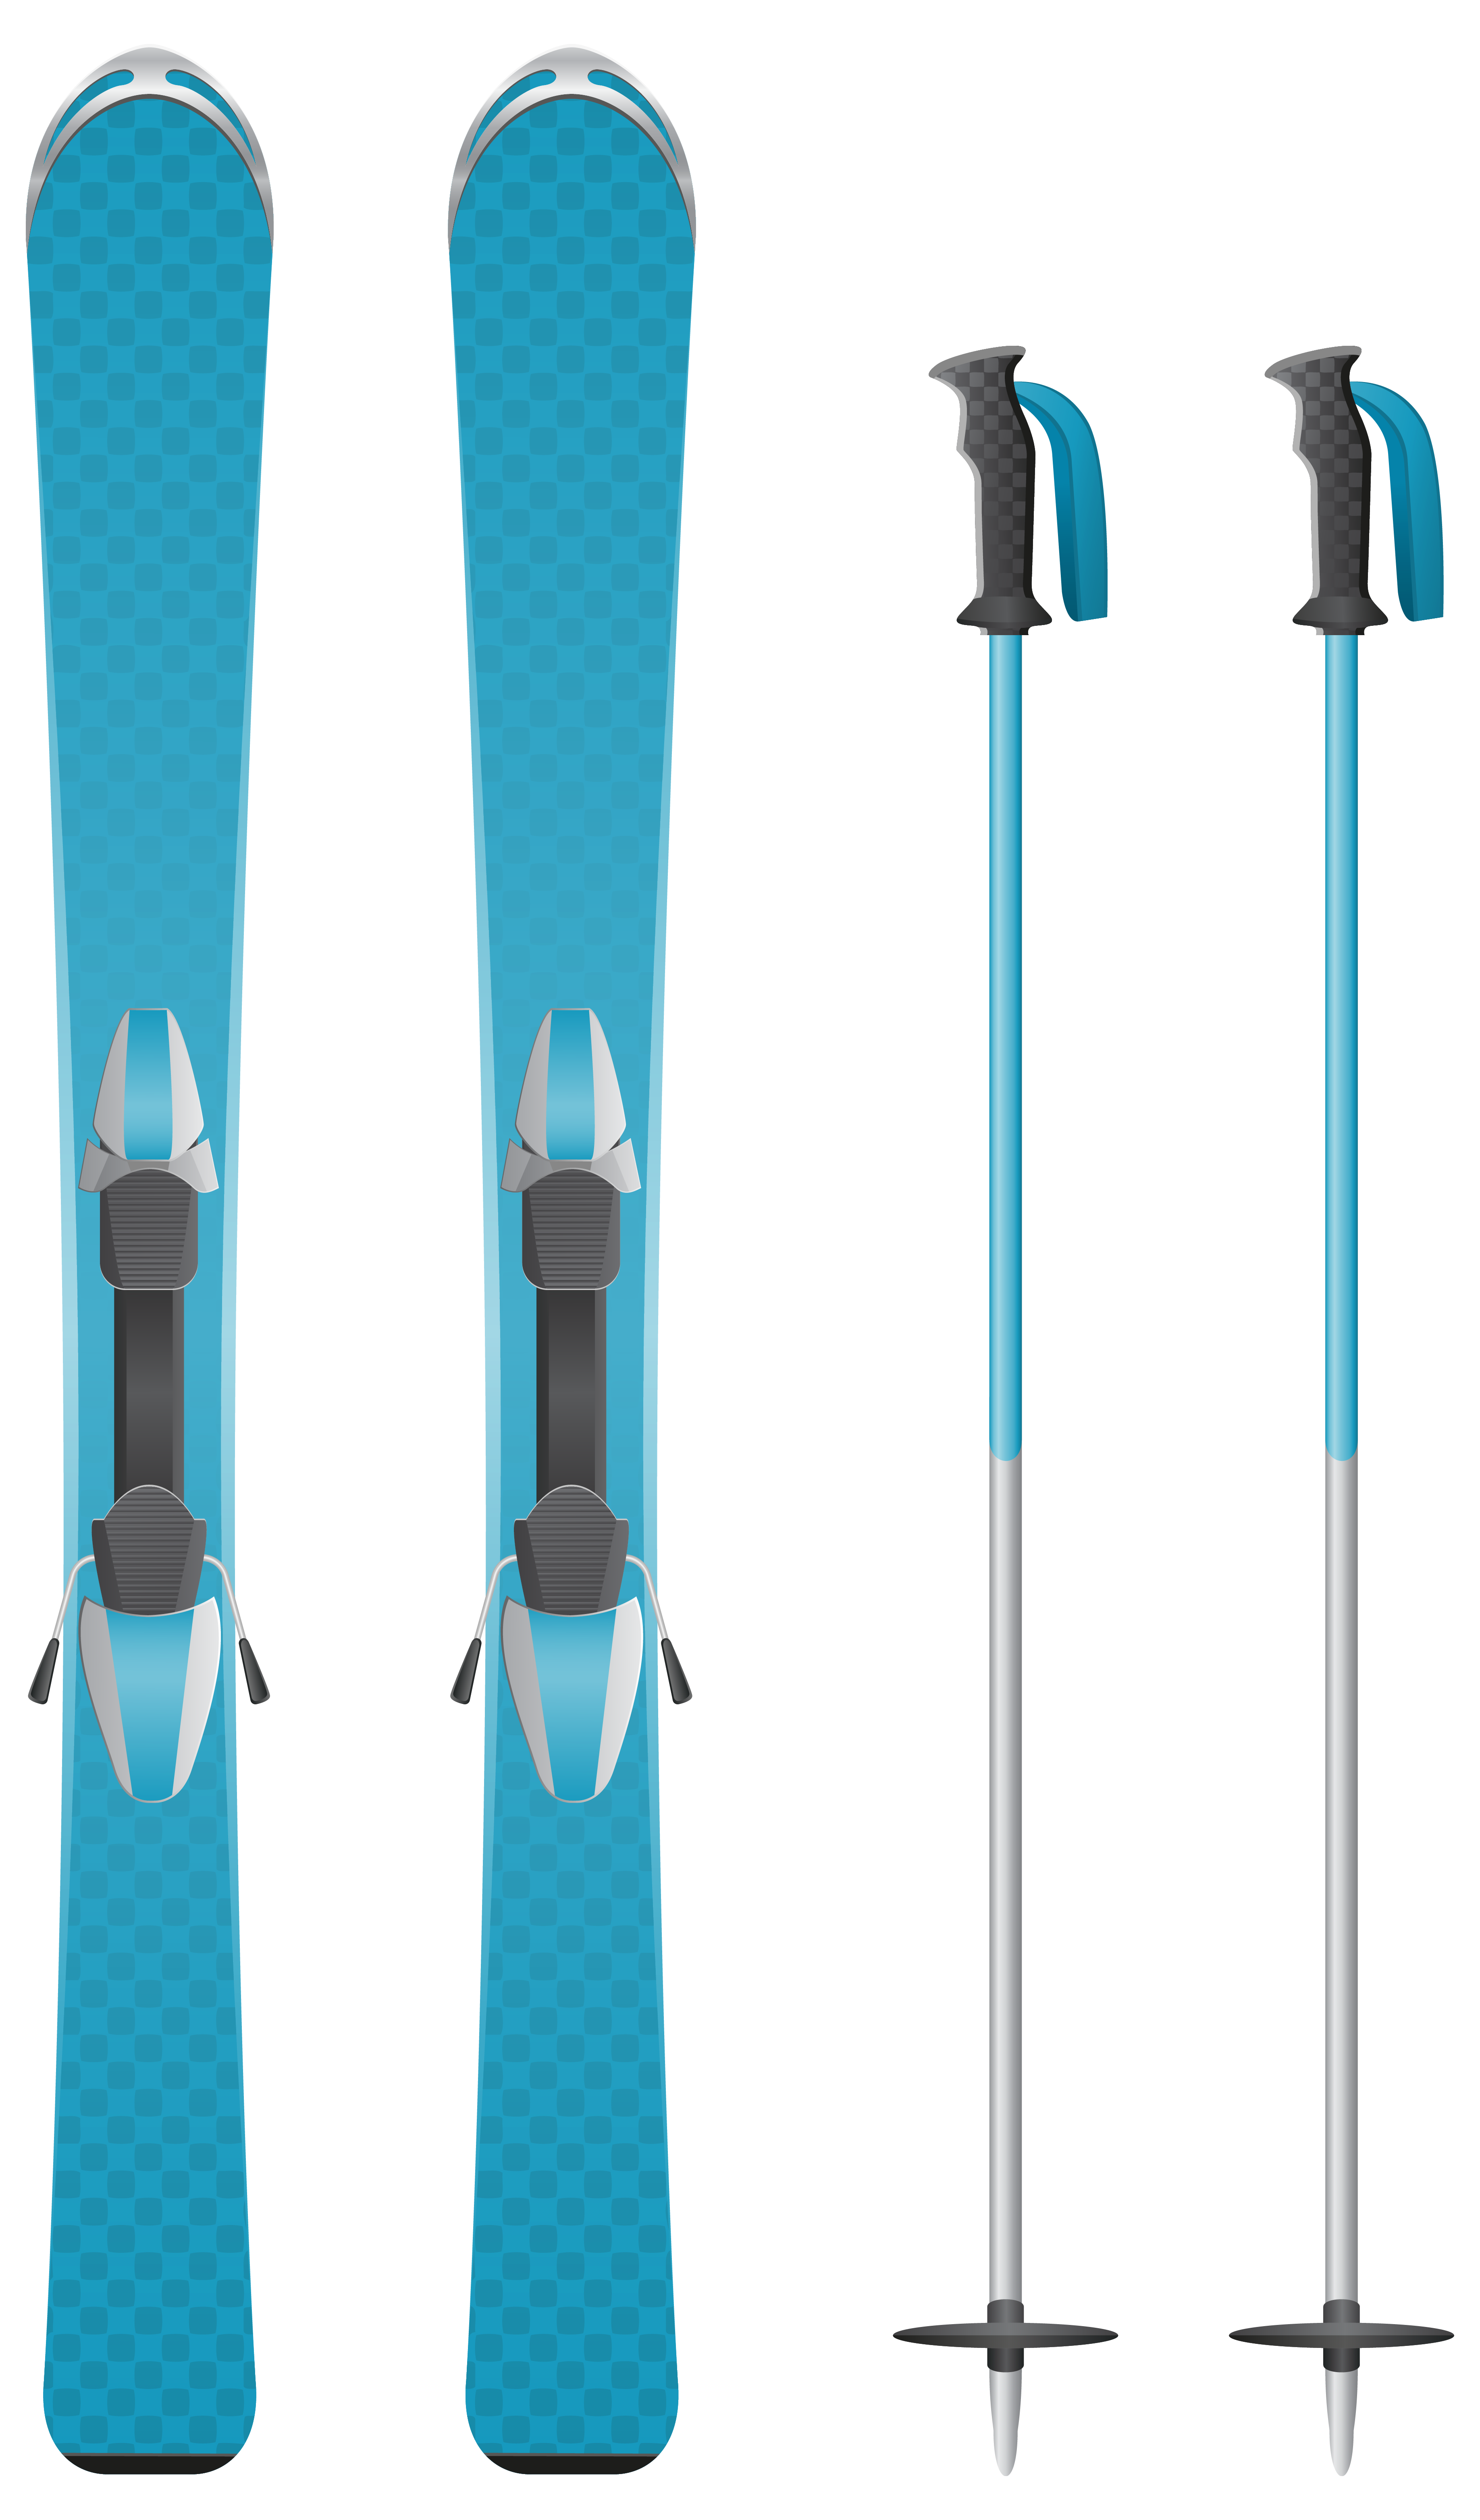 Blue Skis PNG Clipart Image